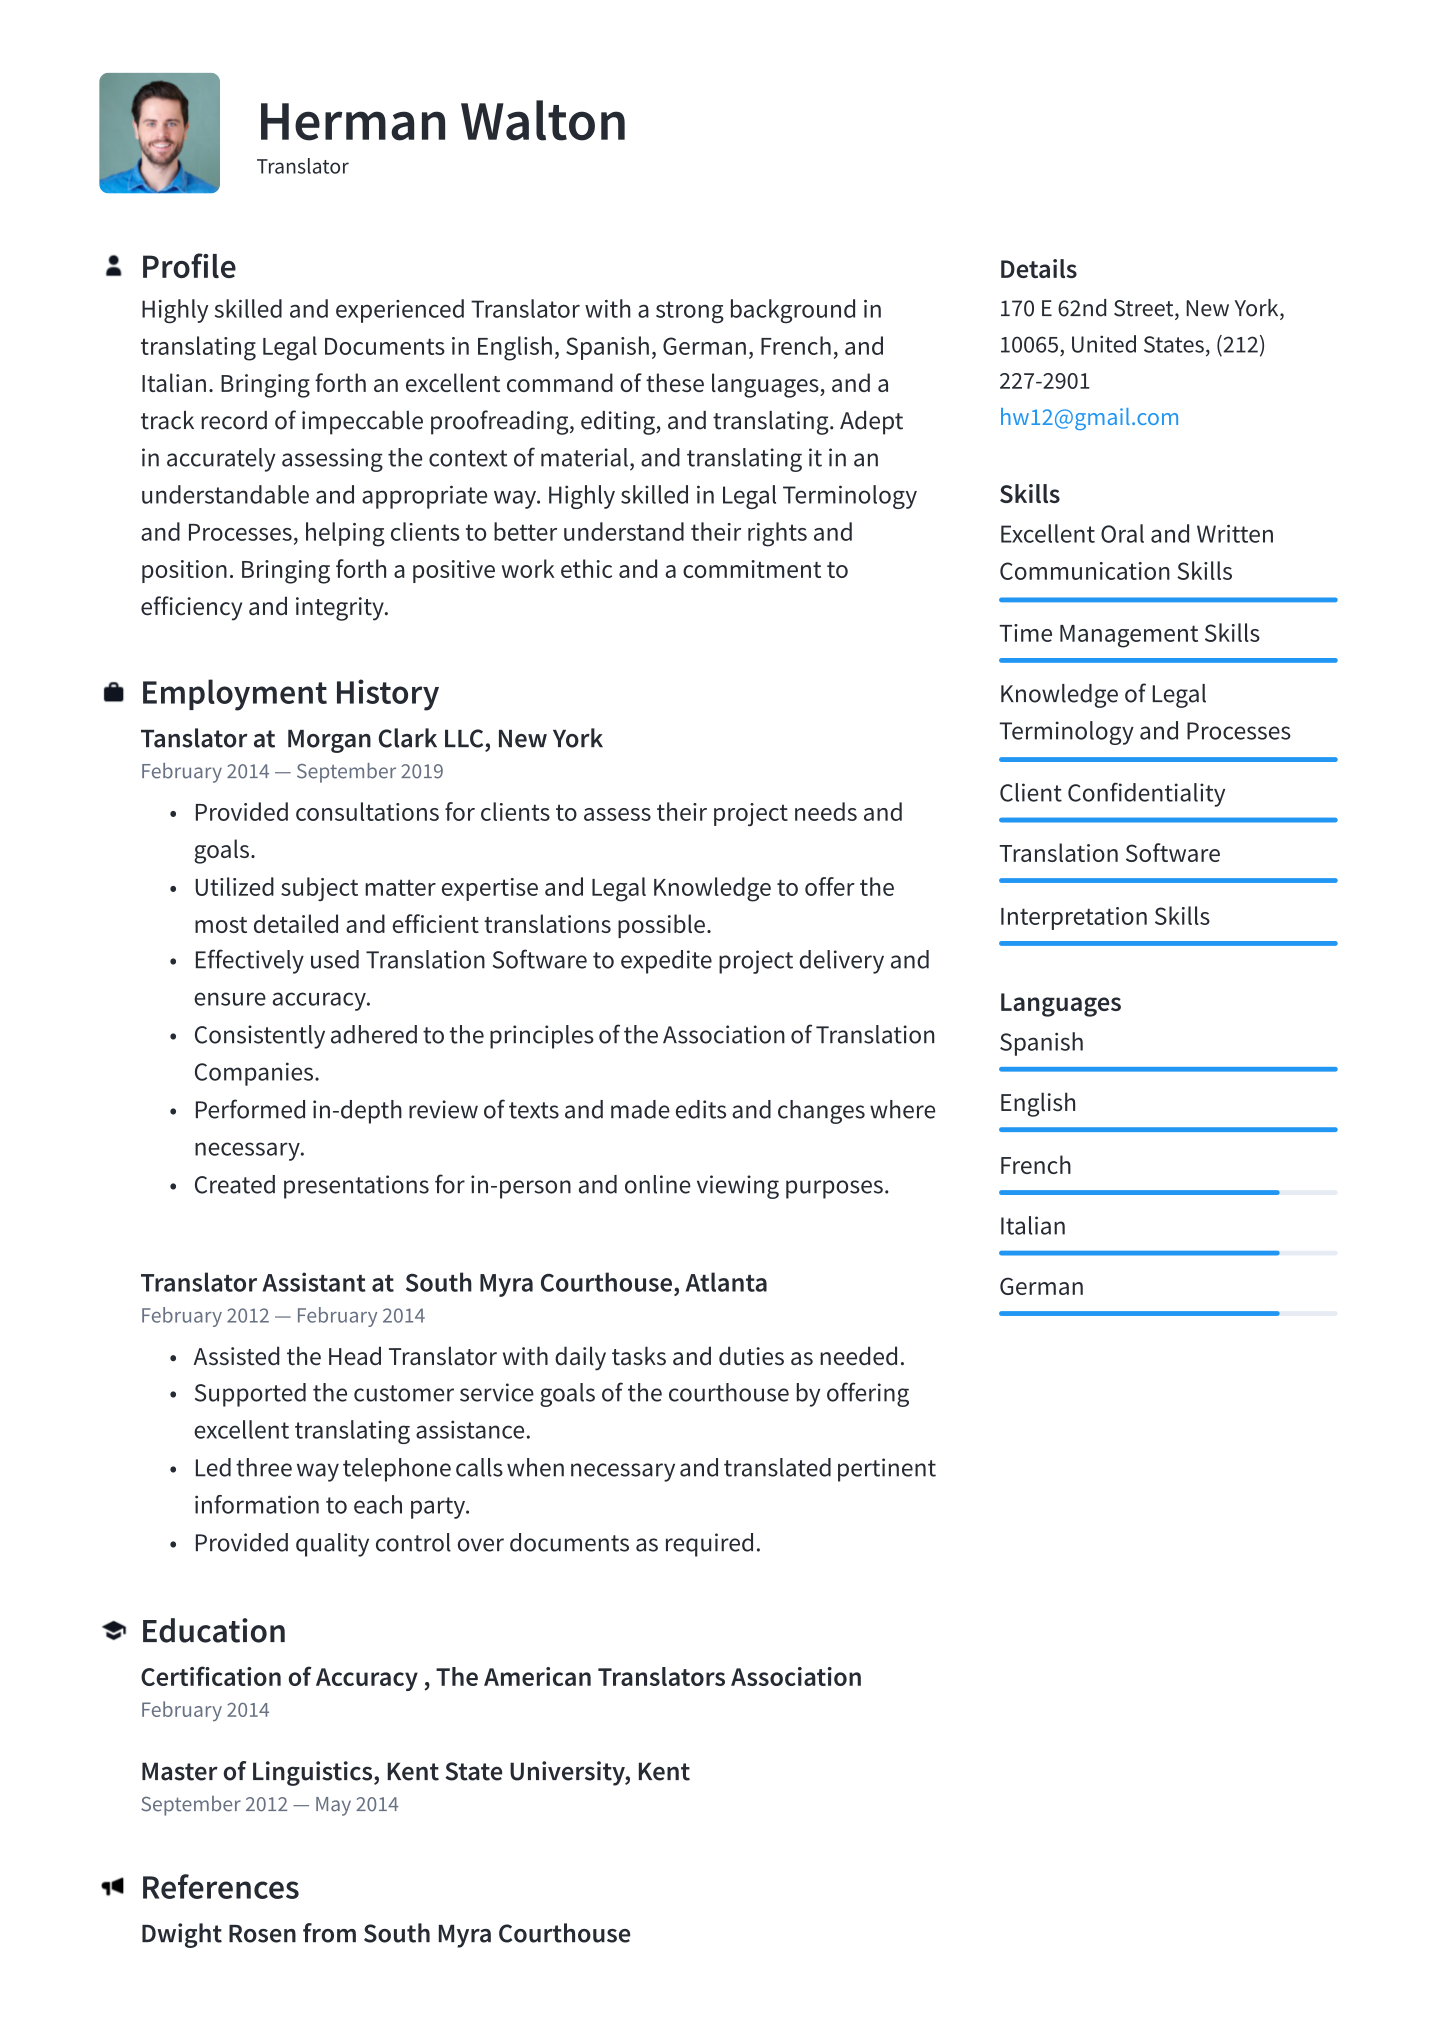 Translator Resume Examples Writing Tips 2020 Free Guide intended for dimensions 1440 X 2036